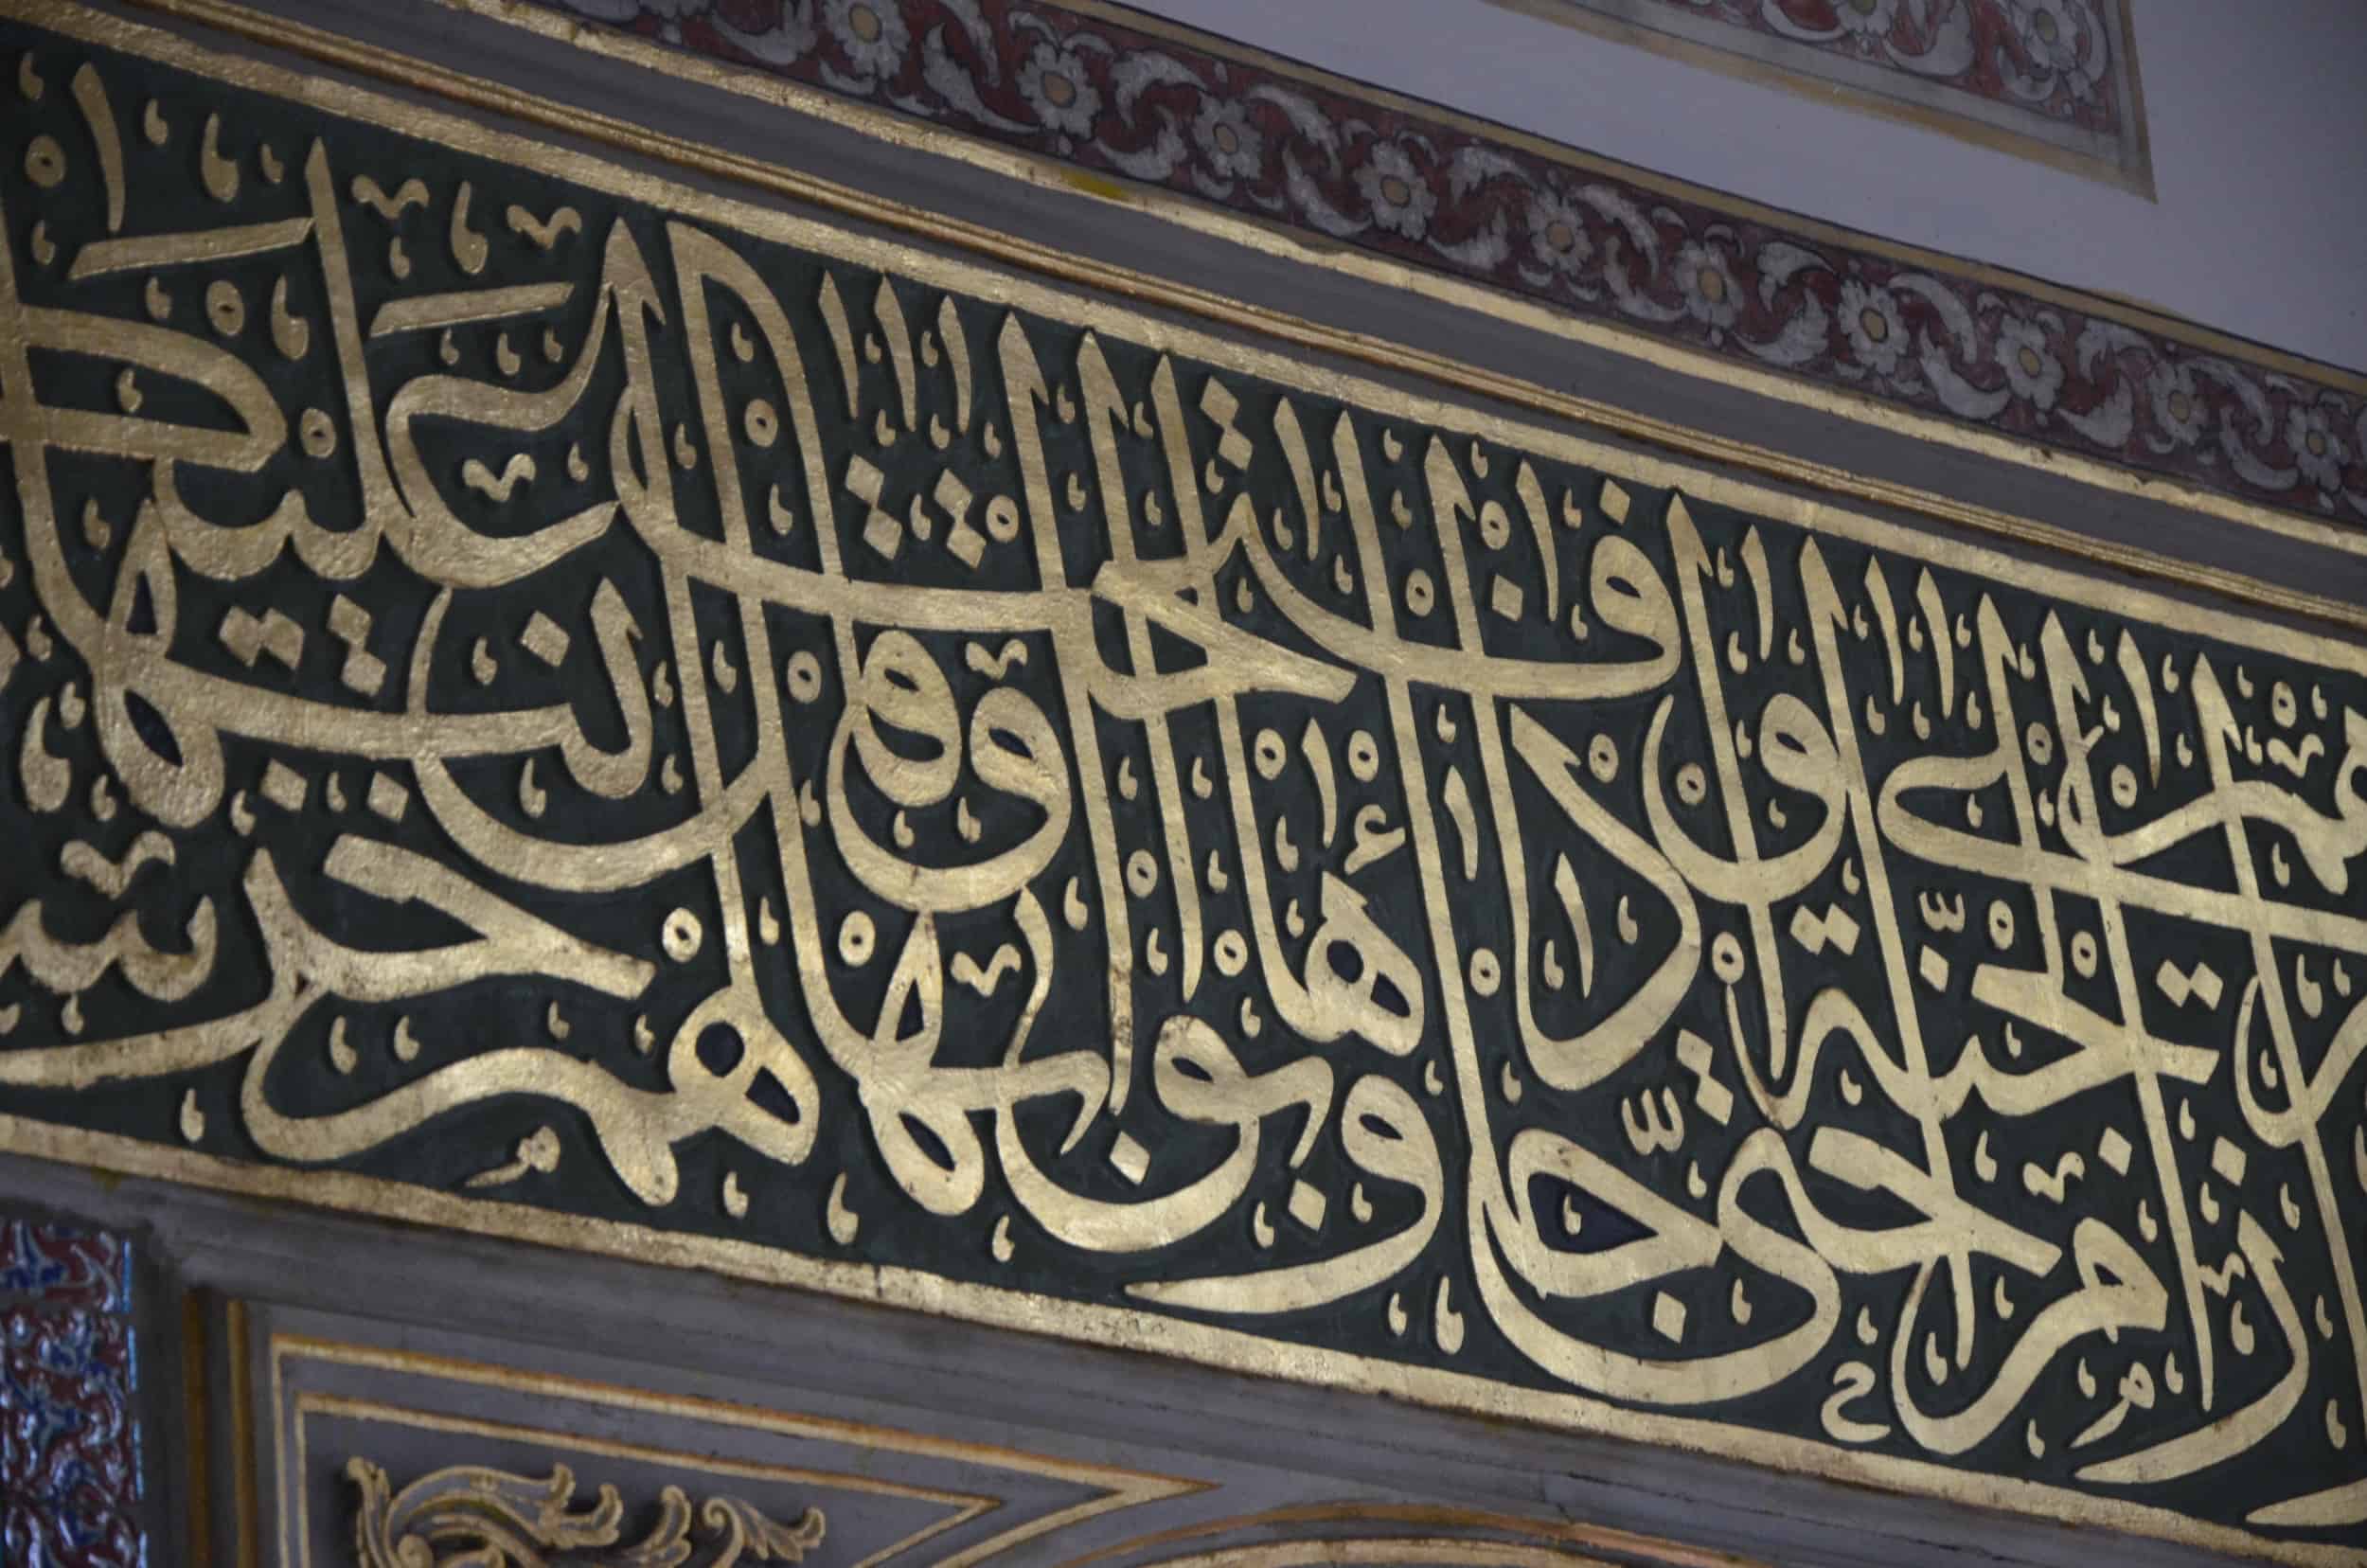 Calligraphy in the Tomb of Mustafa III at the Laleli Mosque, Istanbul, Turkey